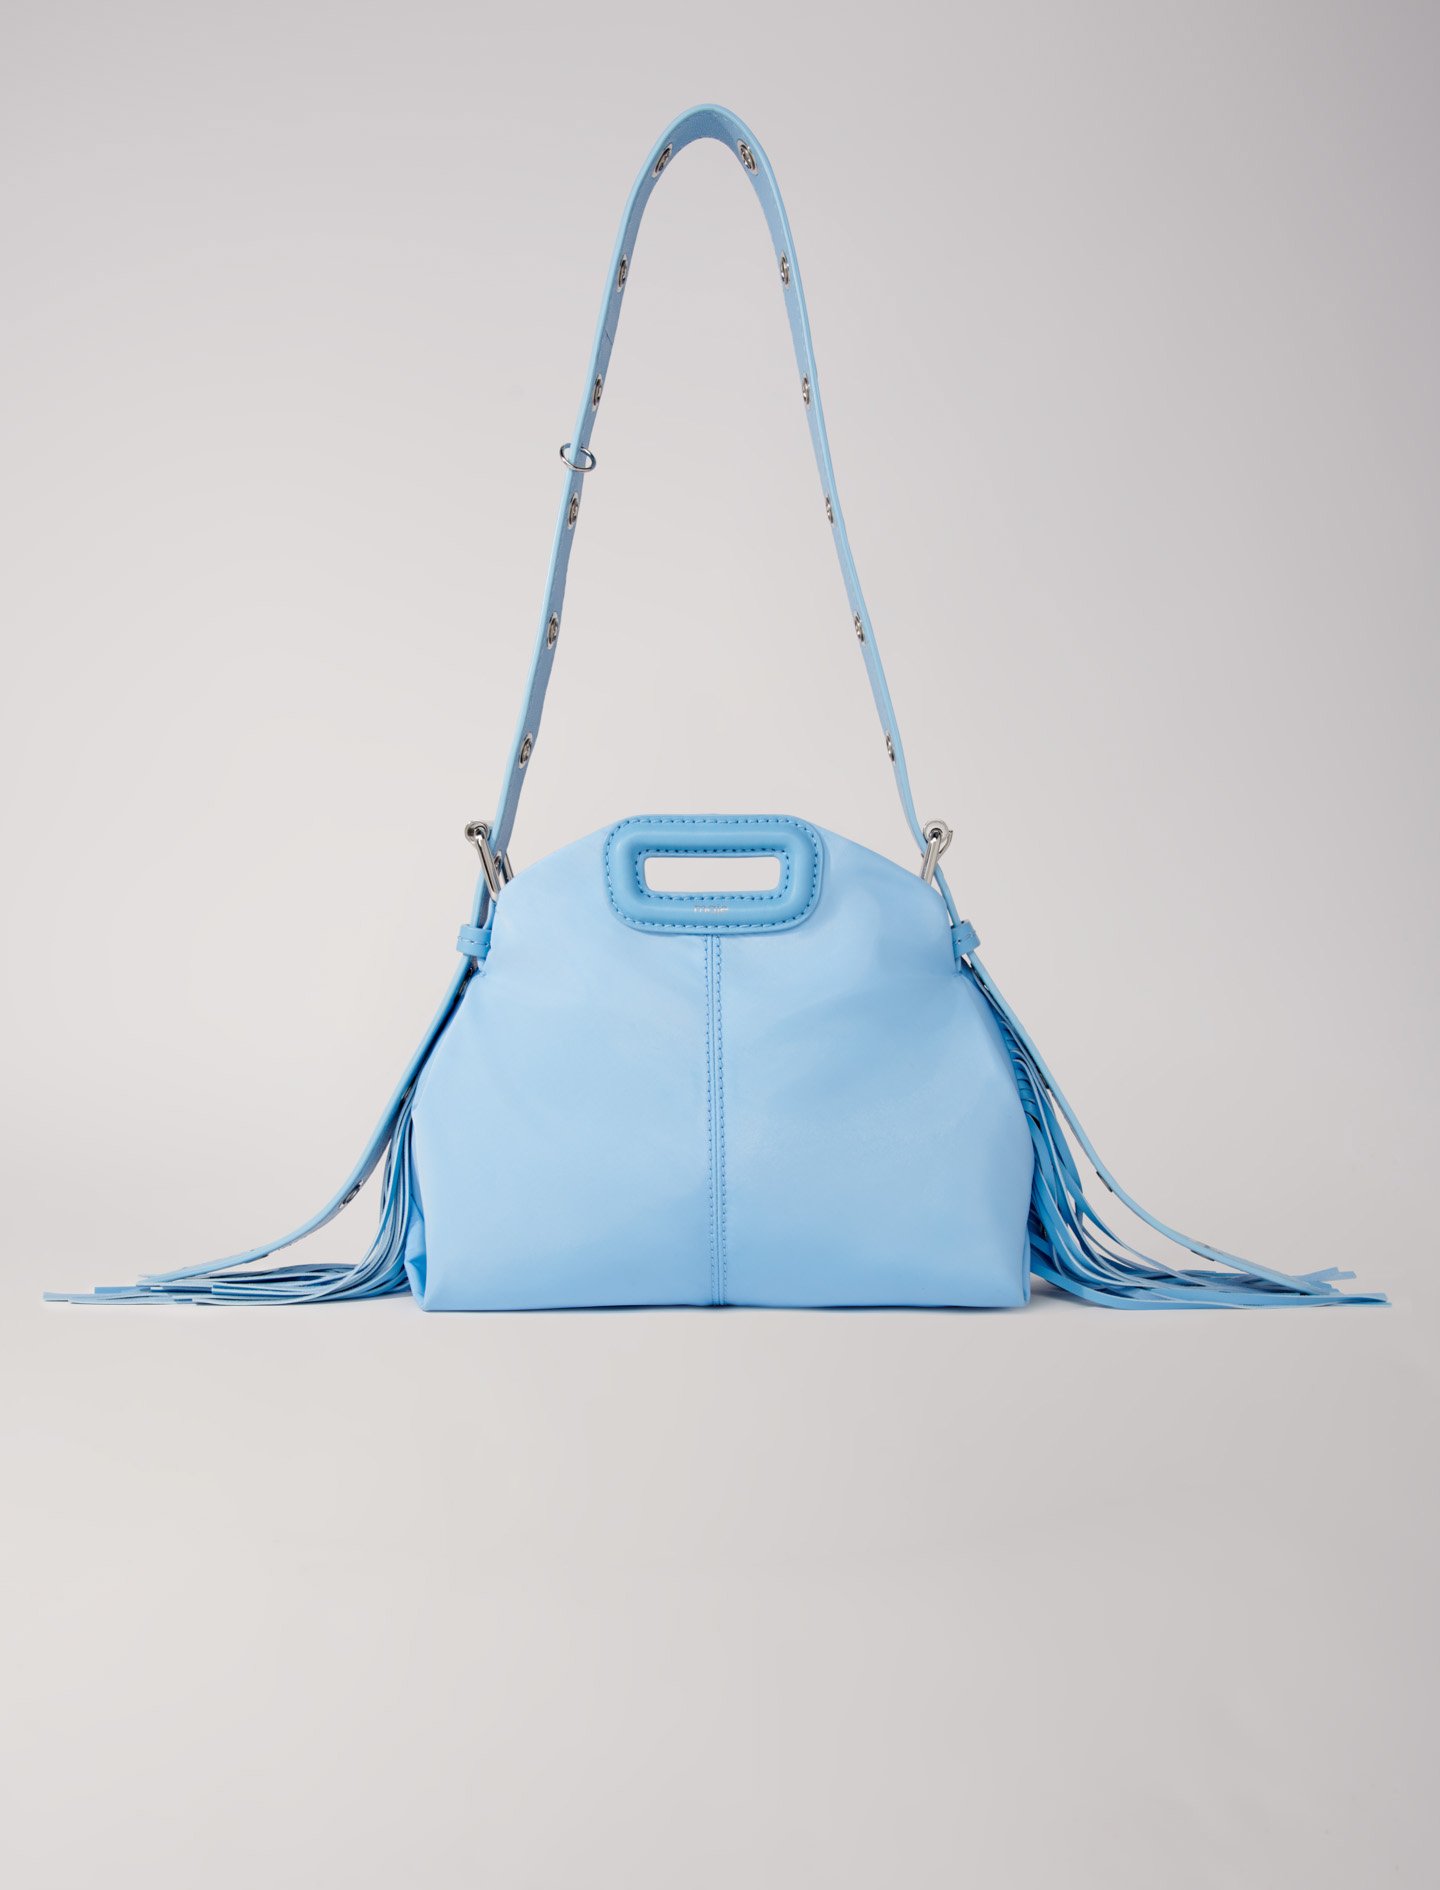 Mixte's polyester Lining: Soft mini Miss M bag for Spring/Summer, size Mixte-All Bags-OS (ONE SIZE), in color Blue / Blue